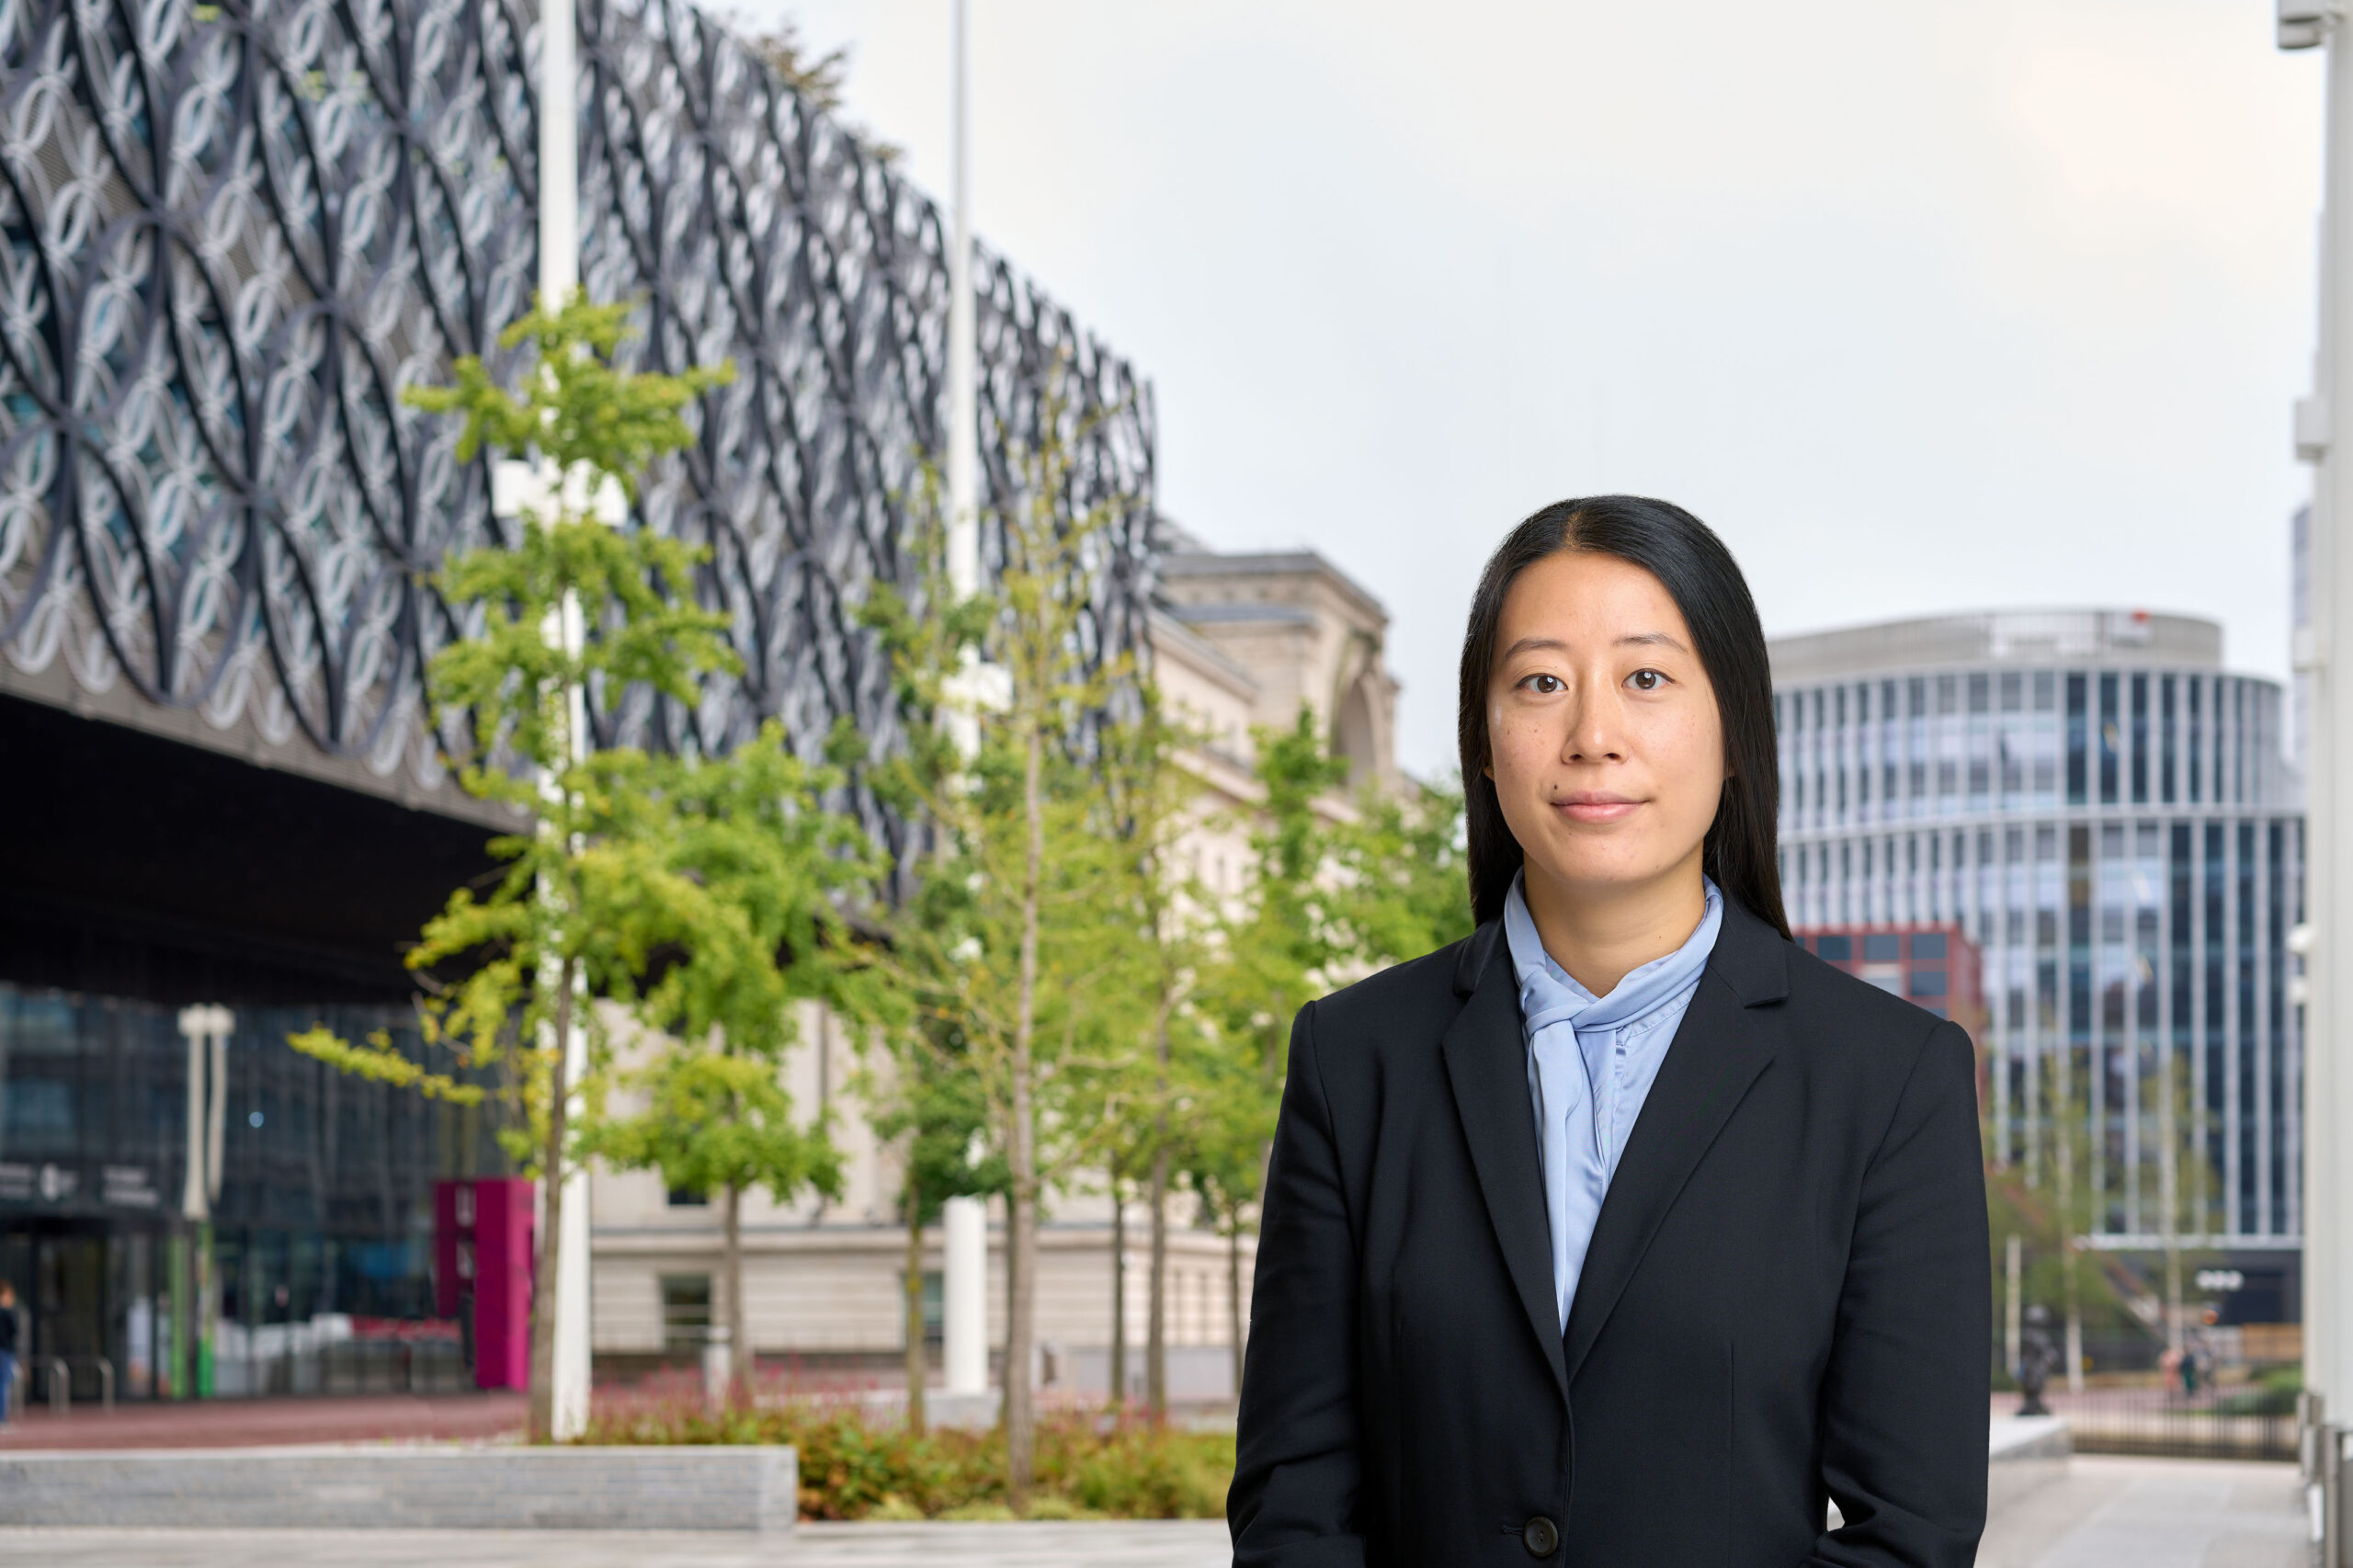 A woman in a light blue shirt and black blazer is standing in front of some trees and buildings in central Birmingham.